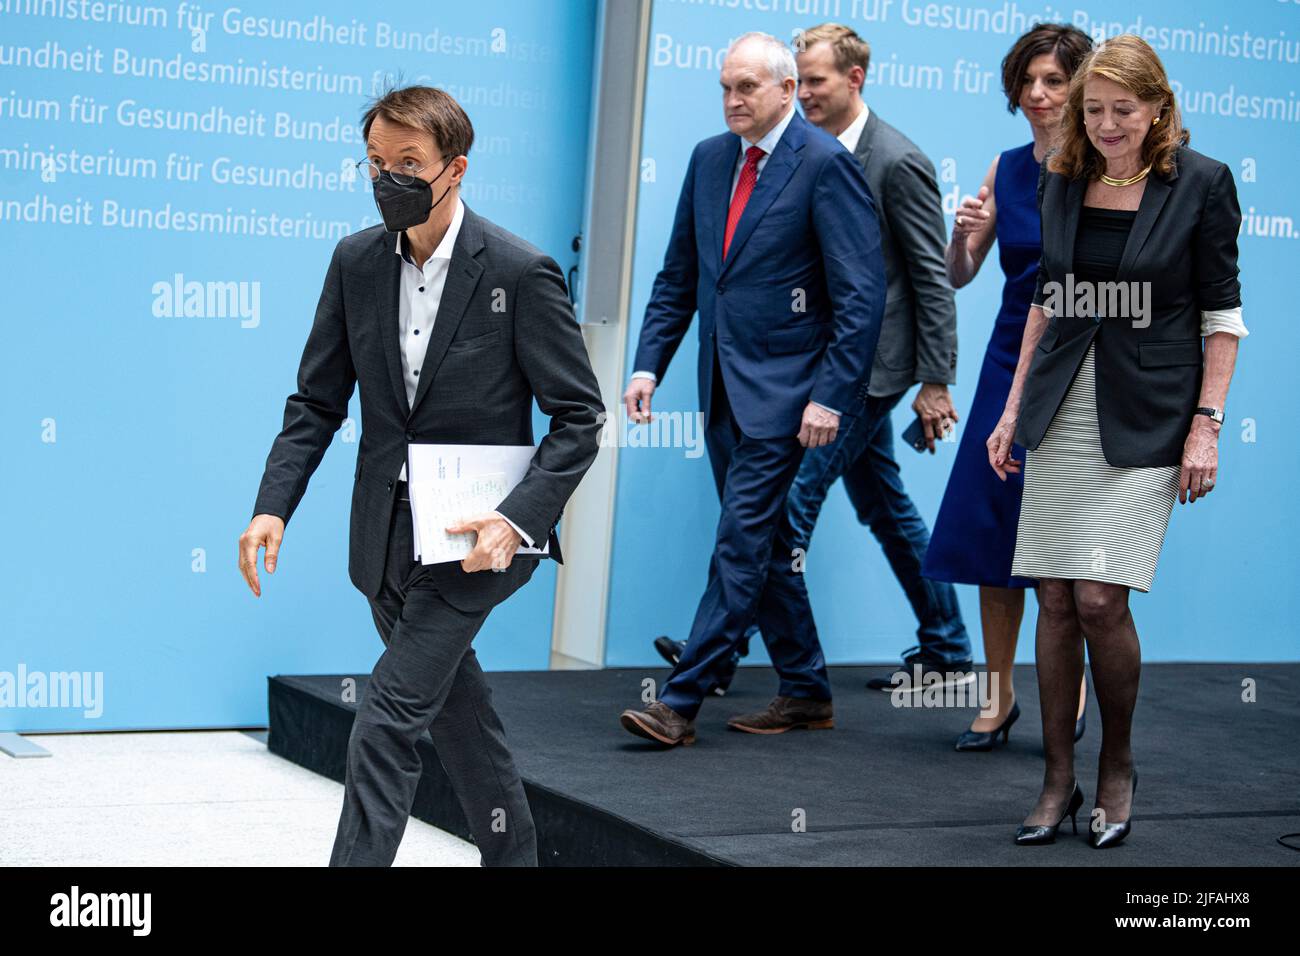 Berlin, Germany. 01st July, 2022. Karl Lauterbach (SPD, l-r), Federal Minister of Health, Christoph Schmidt, President, RWI - Leibniz Institute for Economic Research, Hendrik Streeck, virologist, Jutta Allmendinger, sociologist, and Helga Rübsamen-Schaeff, virologist, chemist and deputy chair of the Expert Committee for the Evaluation of the Infection Protection Act (IfSG), attend a press conference on the IfSG evaluation report. Today, the IfSG presents the results of the evaluation report of the Corona protection measures to date. Credit: Fabian Sommer/dpa/Alamy Live News Stock Photo